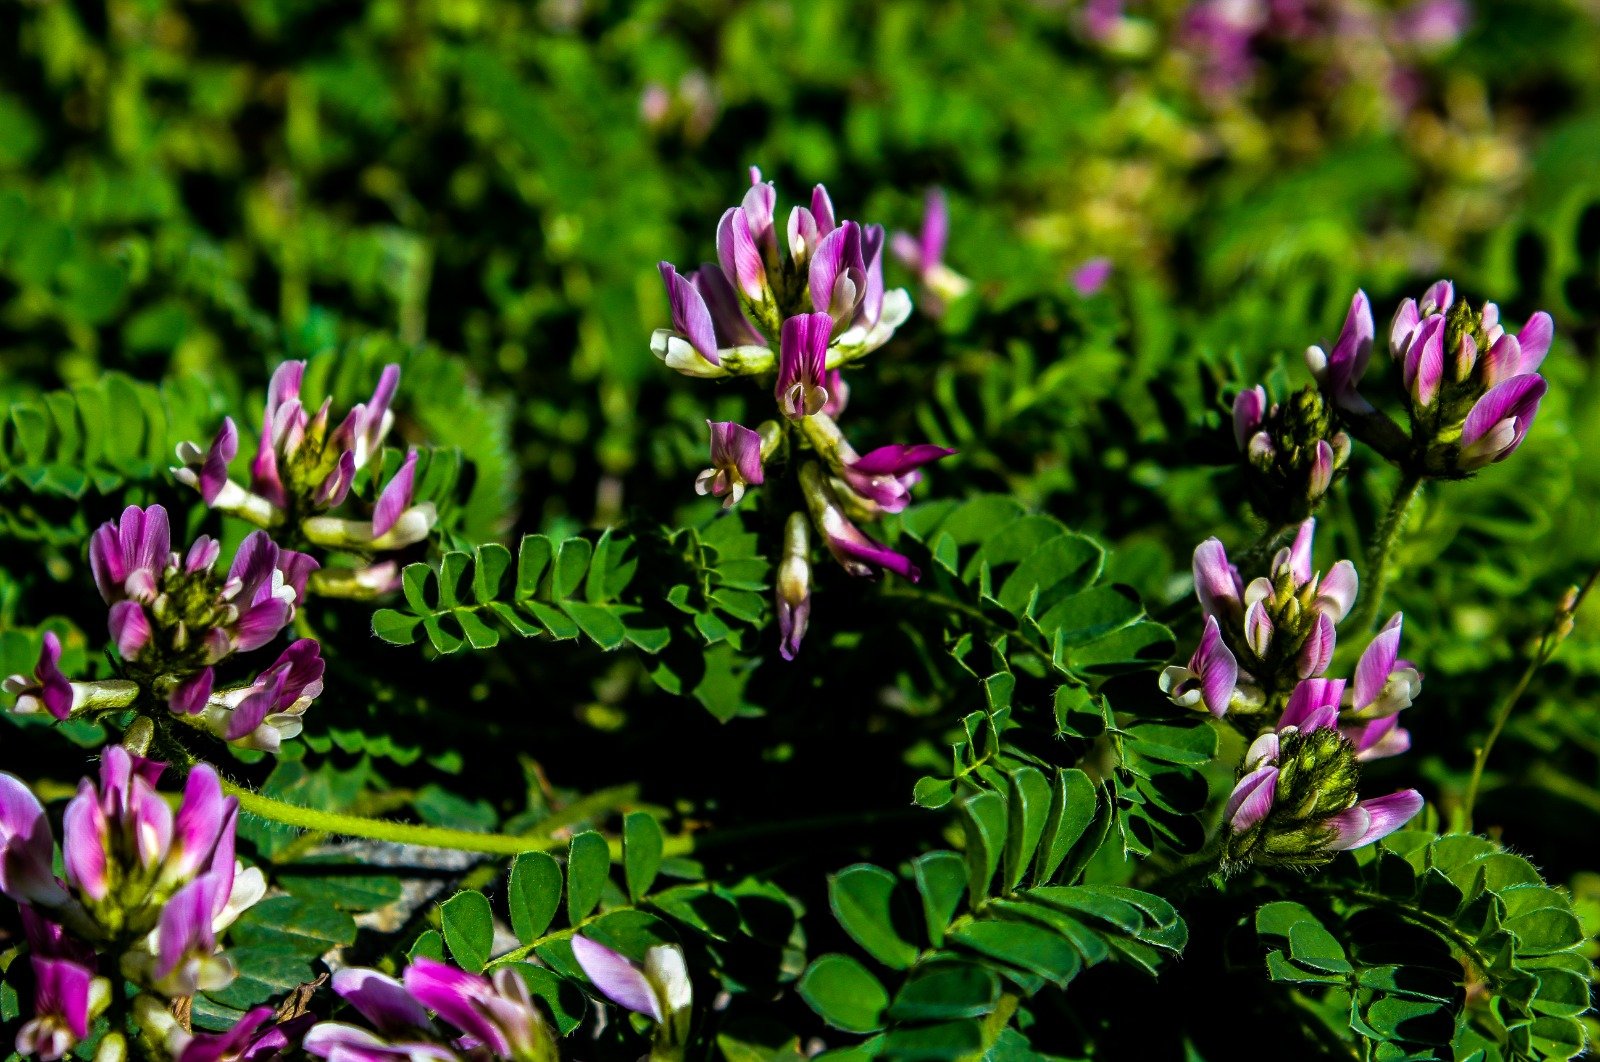 Astragalus bartinense bears brightly colored flowers and grows only in Bartın province, northern Turkey, July 19, 2020. (AA Photo)